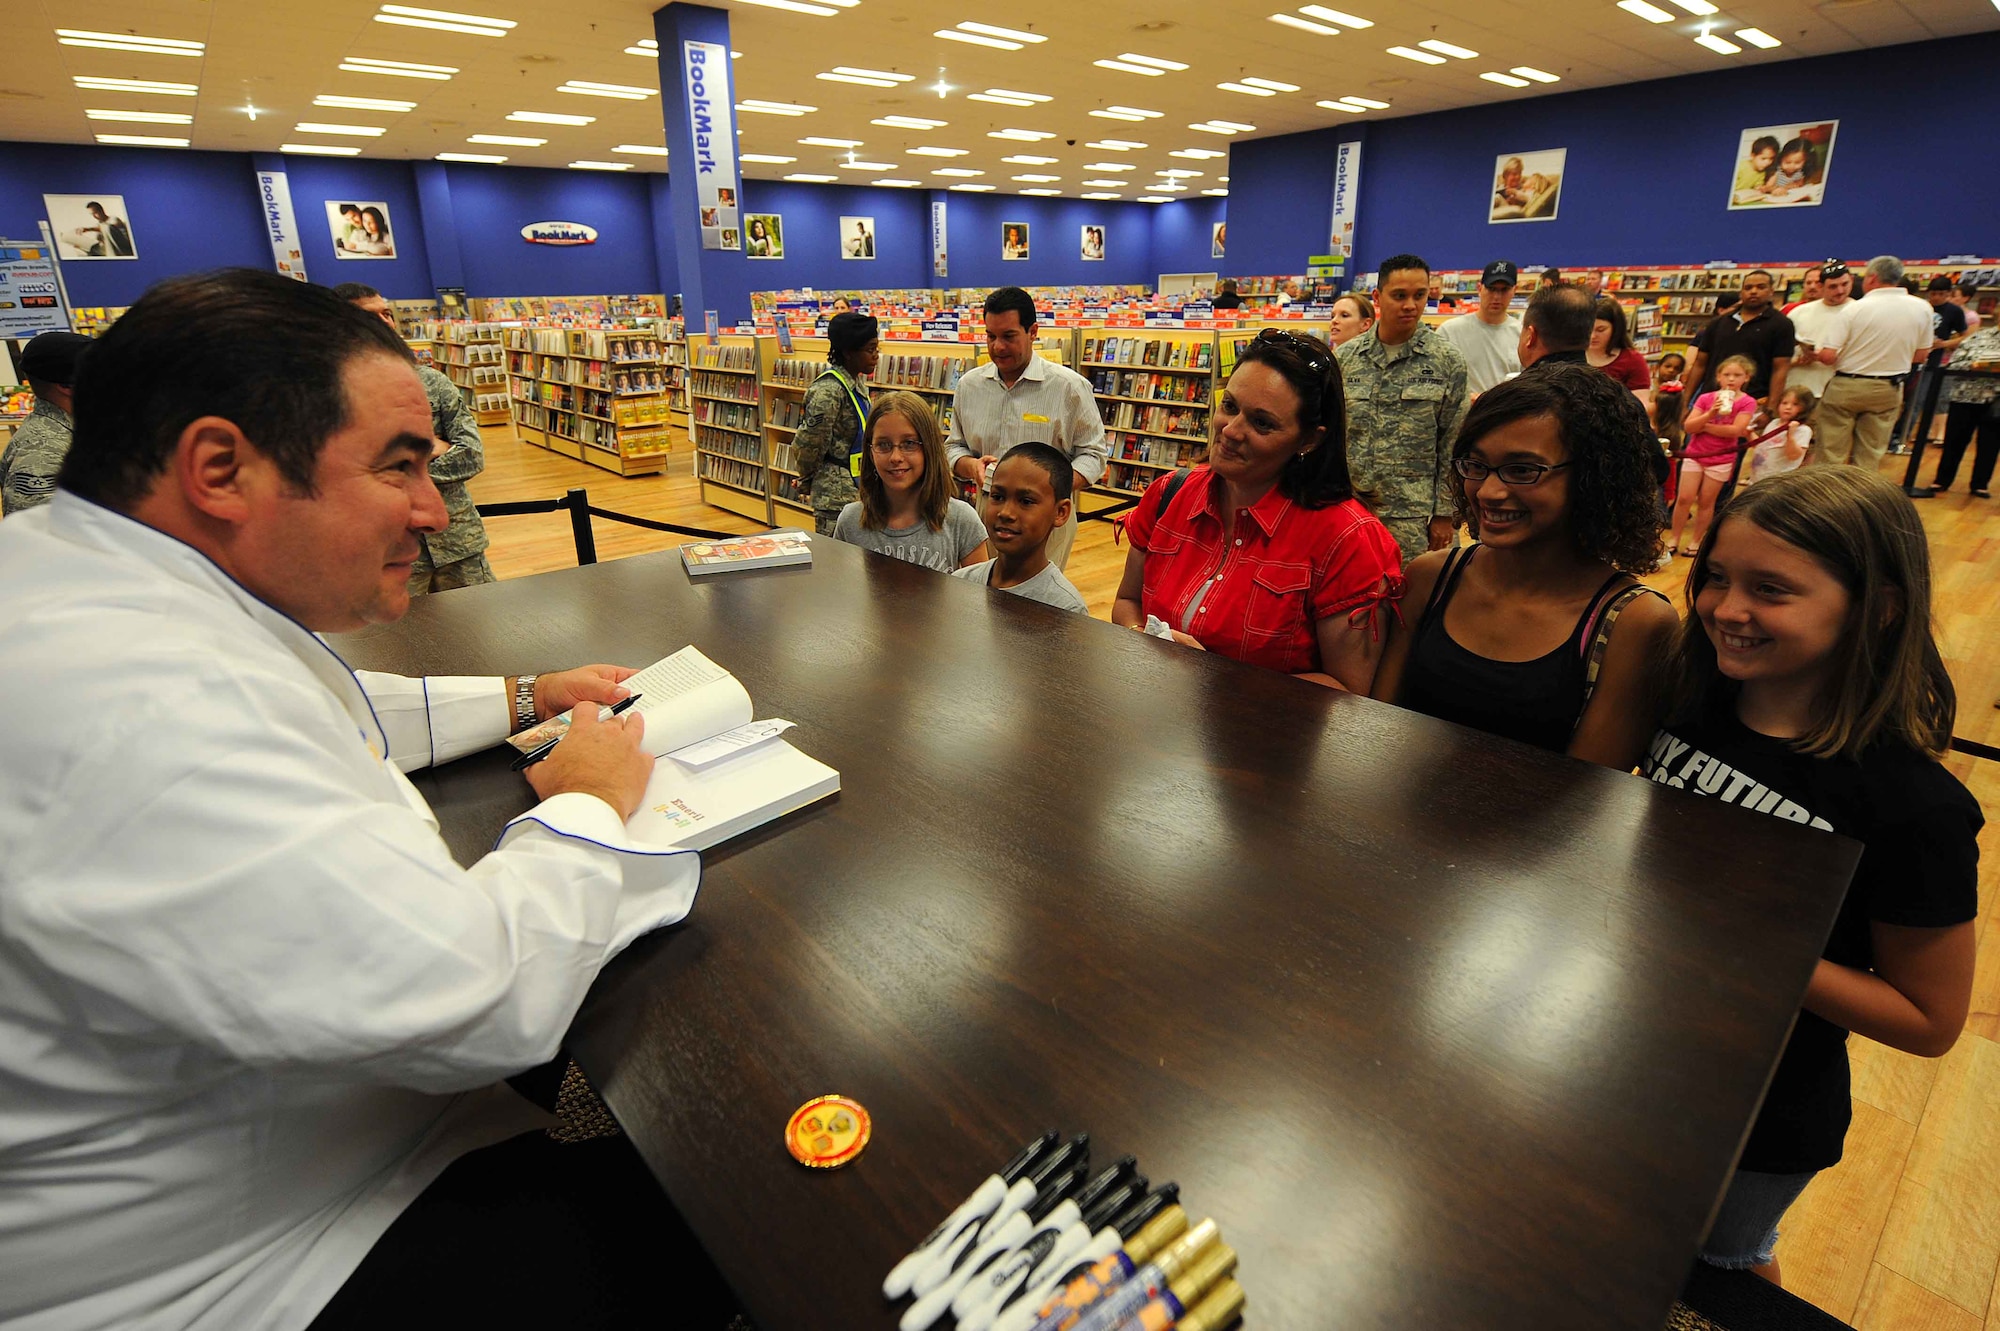 Celebrity Chef Emeril Lagasse signs copies of his cookbooks for fans at the Kaiserslautern Military Community Center, Ramstein Air Base, Germany, May 29, 2010. Emeril Lagasse visited the KMCC to promote his new book along with providing a book signing and a full production cooking exhibition copies of his new book and performing an hour long cooking demonstration for over a thousand visitors. (U.S. Air Force photo by Staff Sgt. Stephen J. Otero)